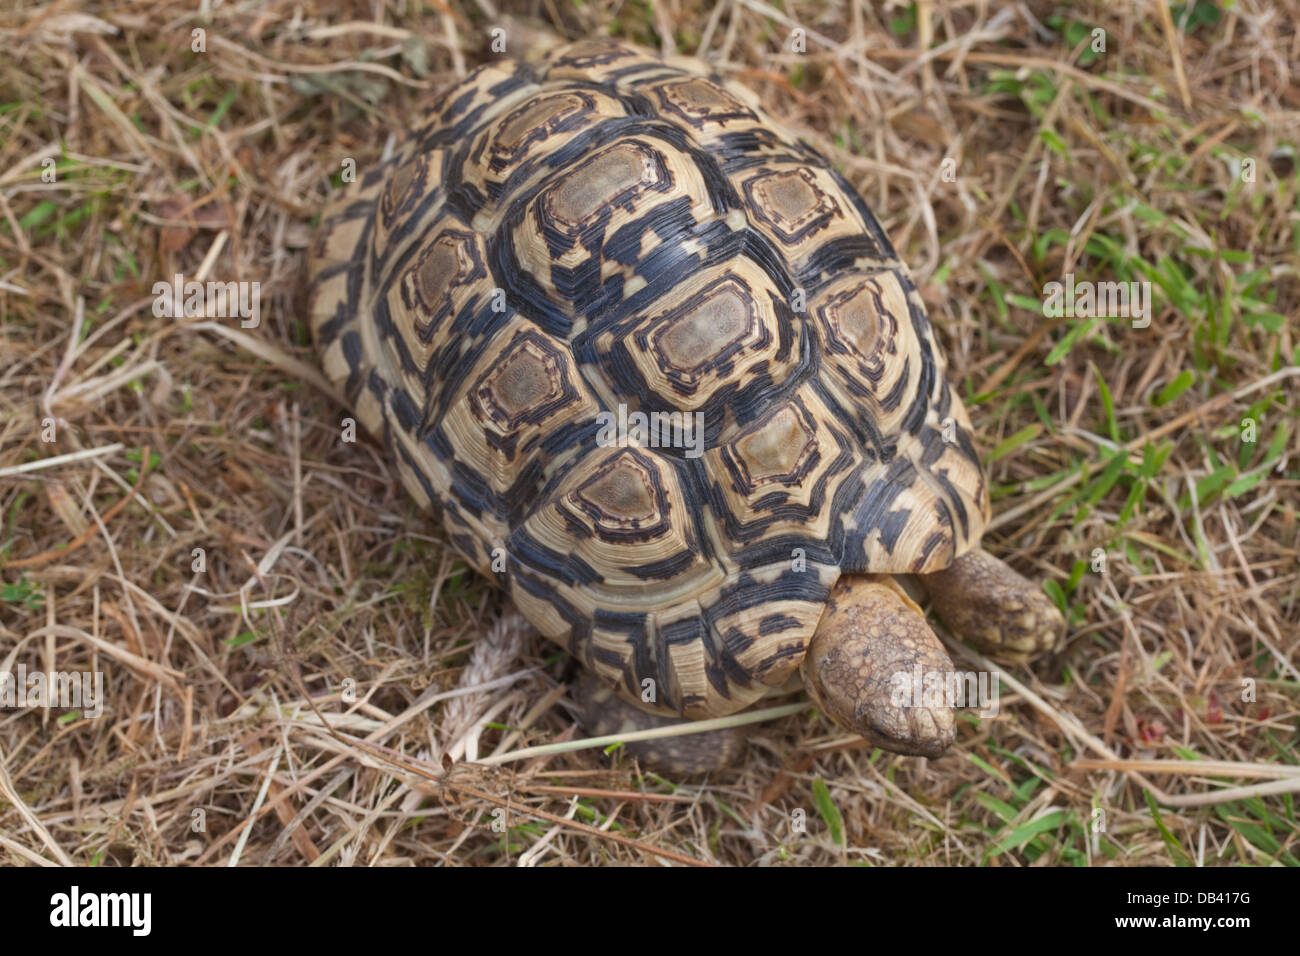 Leopard Tortoise (Geochelone pardalis). Carapace showing disruptive pattern of markings which break up and camouflage shell. Stock Photo